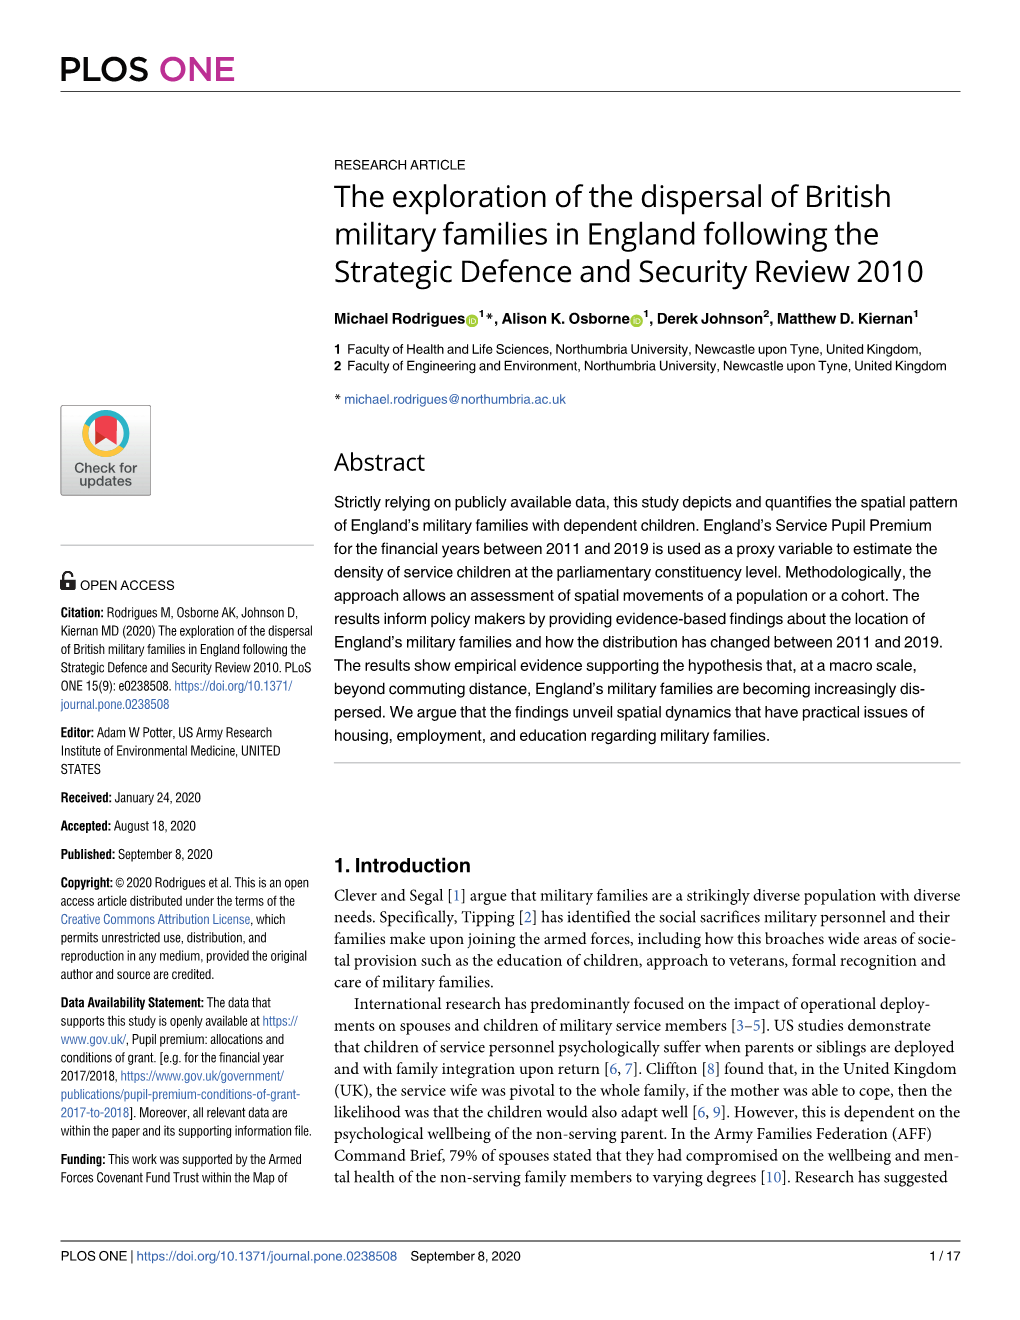 The Exploration of the Dispersal of British Military Families in England Following the Strategic Defence and Security Review 2010